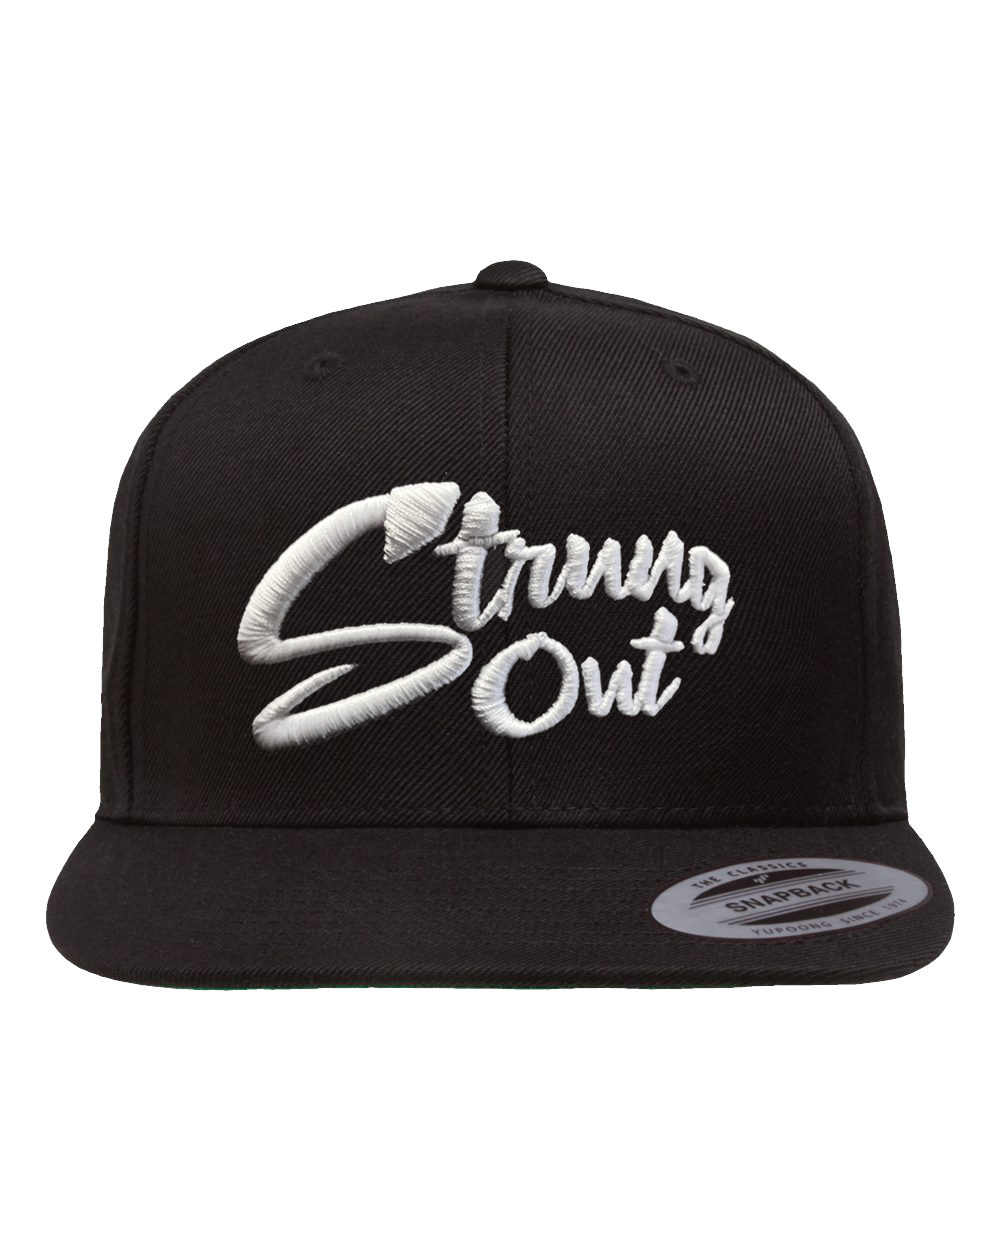 Crossroads Embroidered Snapback - Blk/Wht